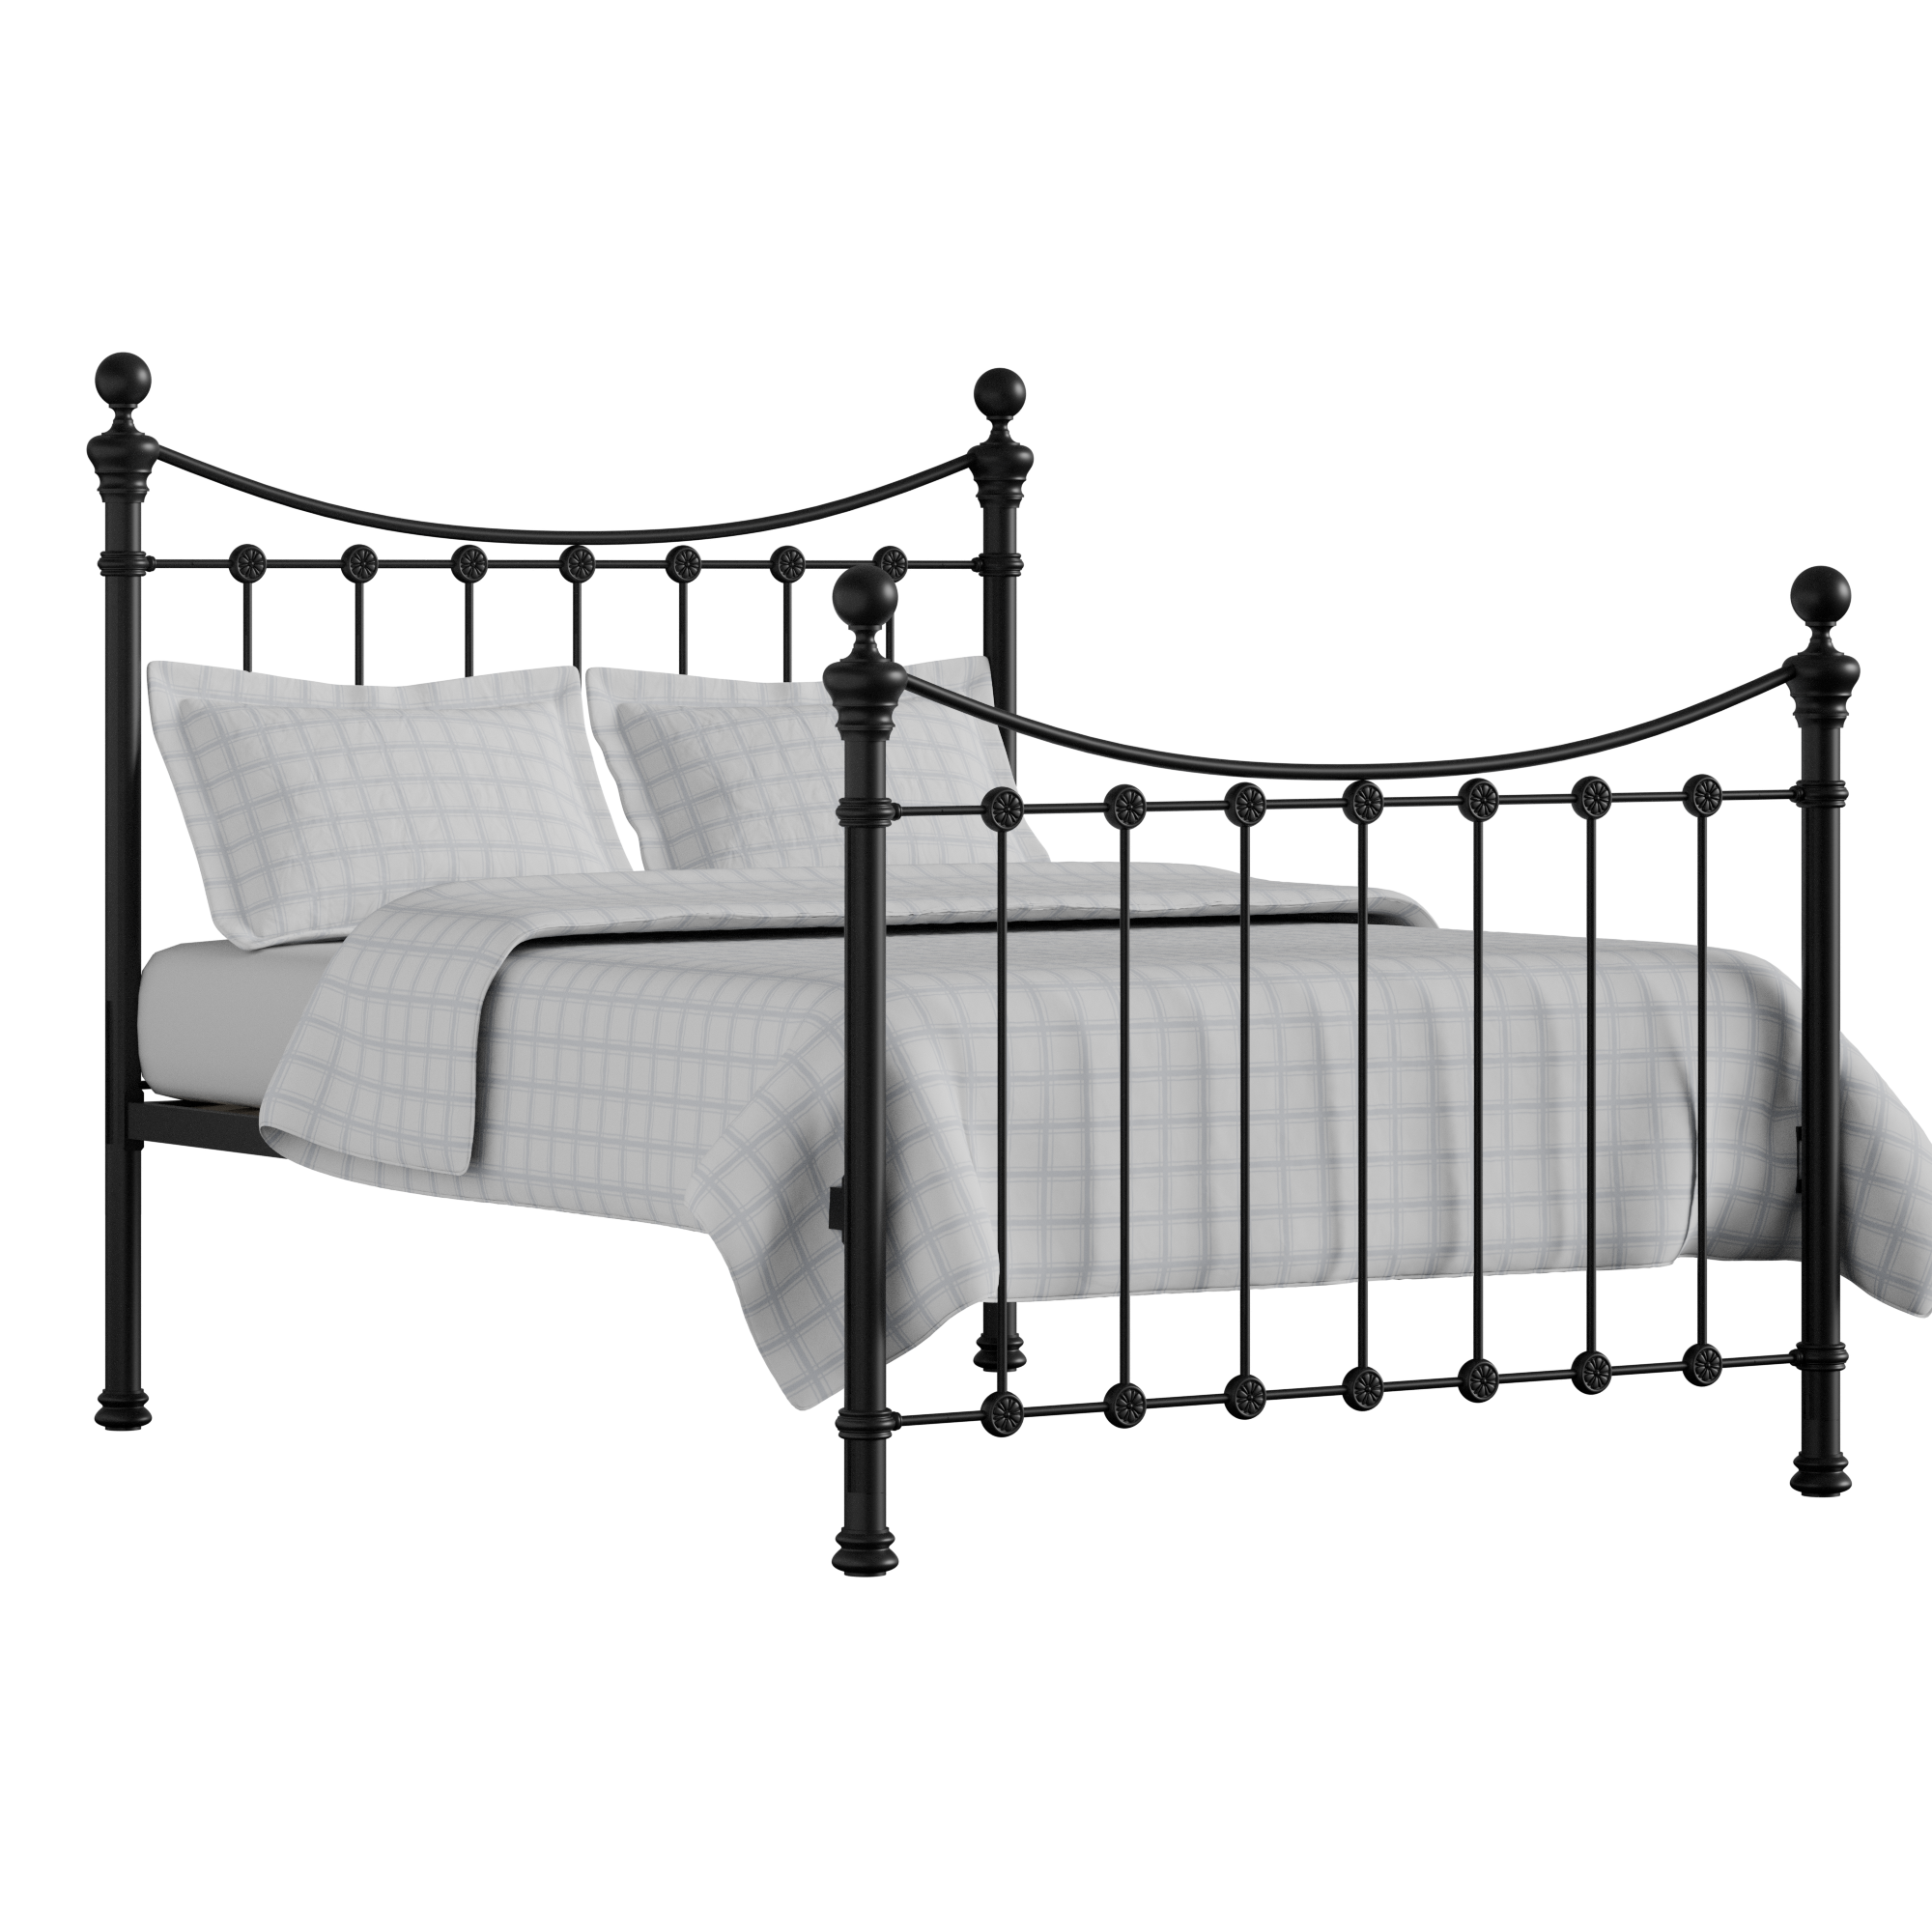 Selkirk Solo iron/metal bed in black with Juno mattress